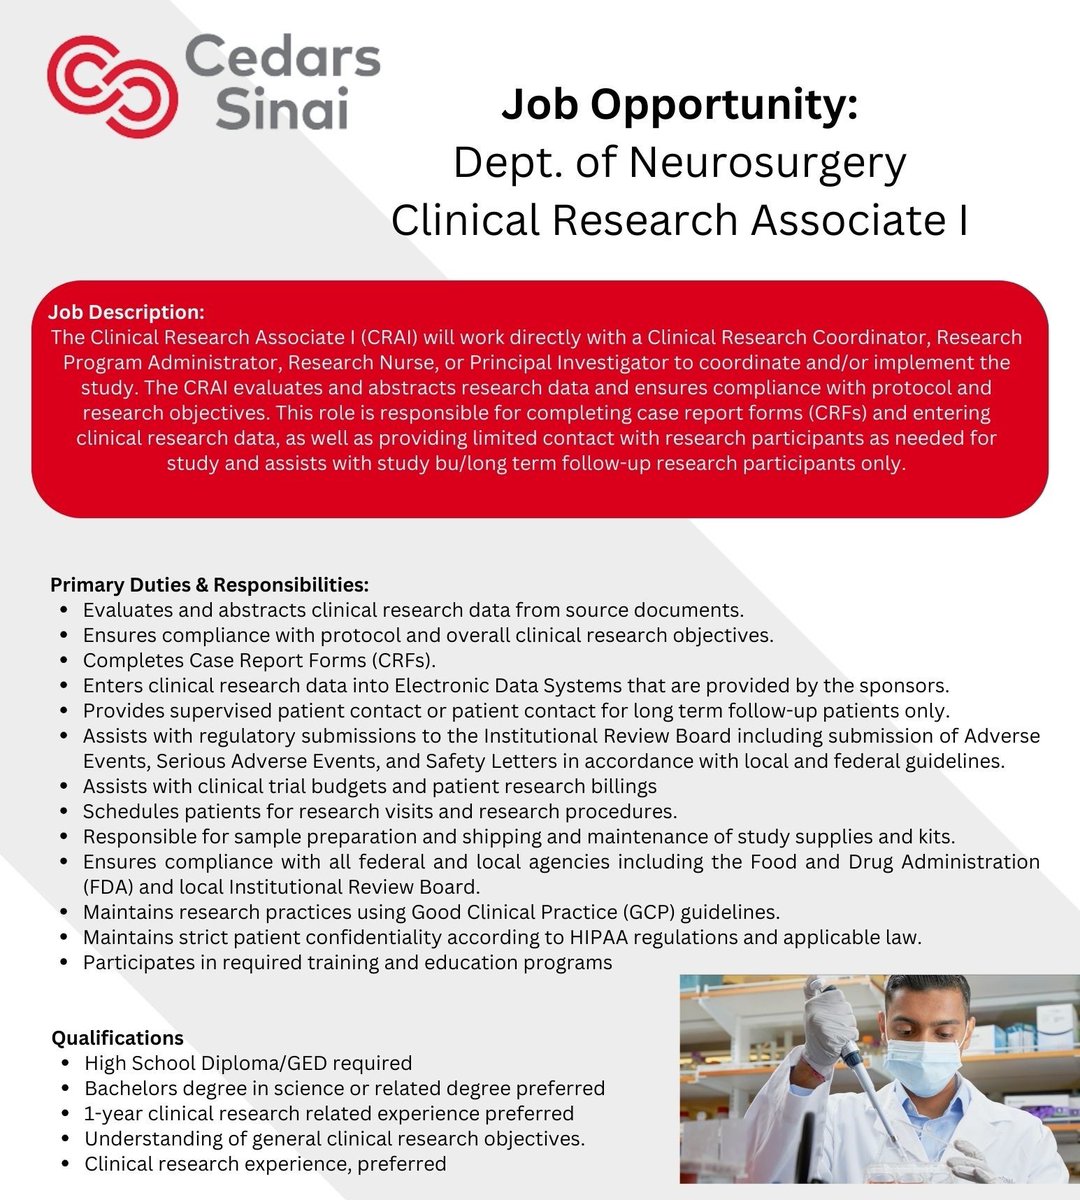 Attention Medical Students: We’re Hiring! Interested in Research? Join Cedars-Sinai’s Department of Neurosurgery as a Clinical Research Associate! If interested, please send CV to Samantha.Phu@cshs.org #MedicalResearch #MedTwitter #Medstudents #medstudenttwitter